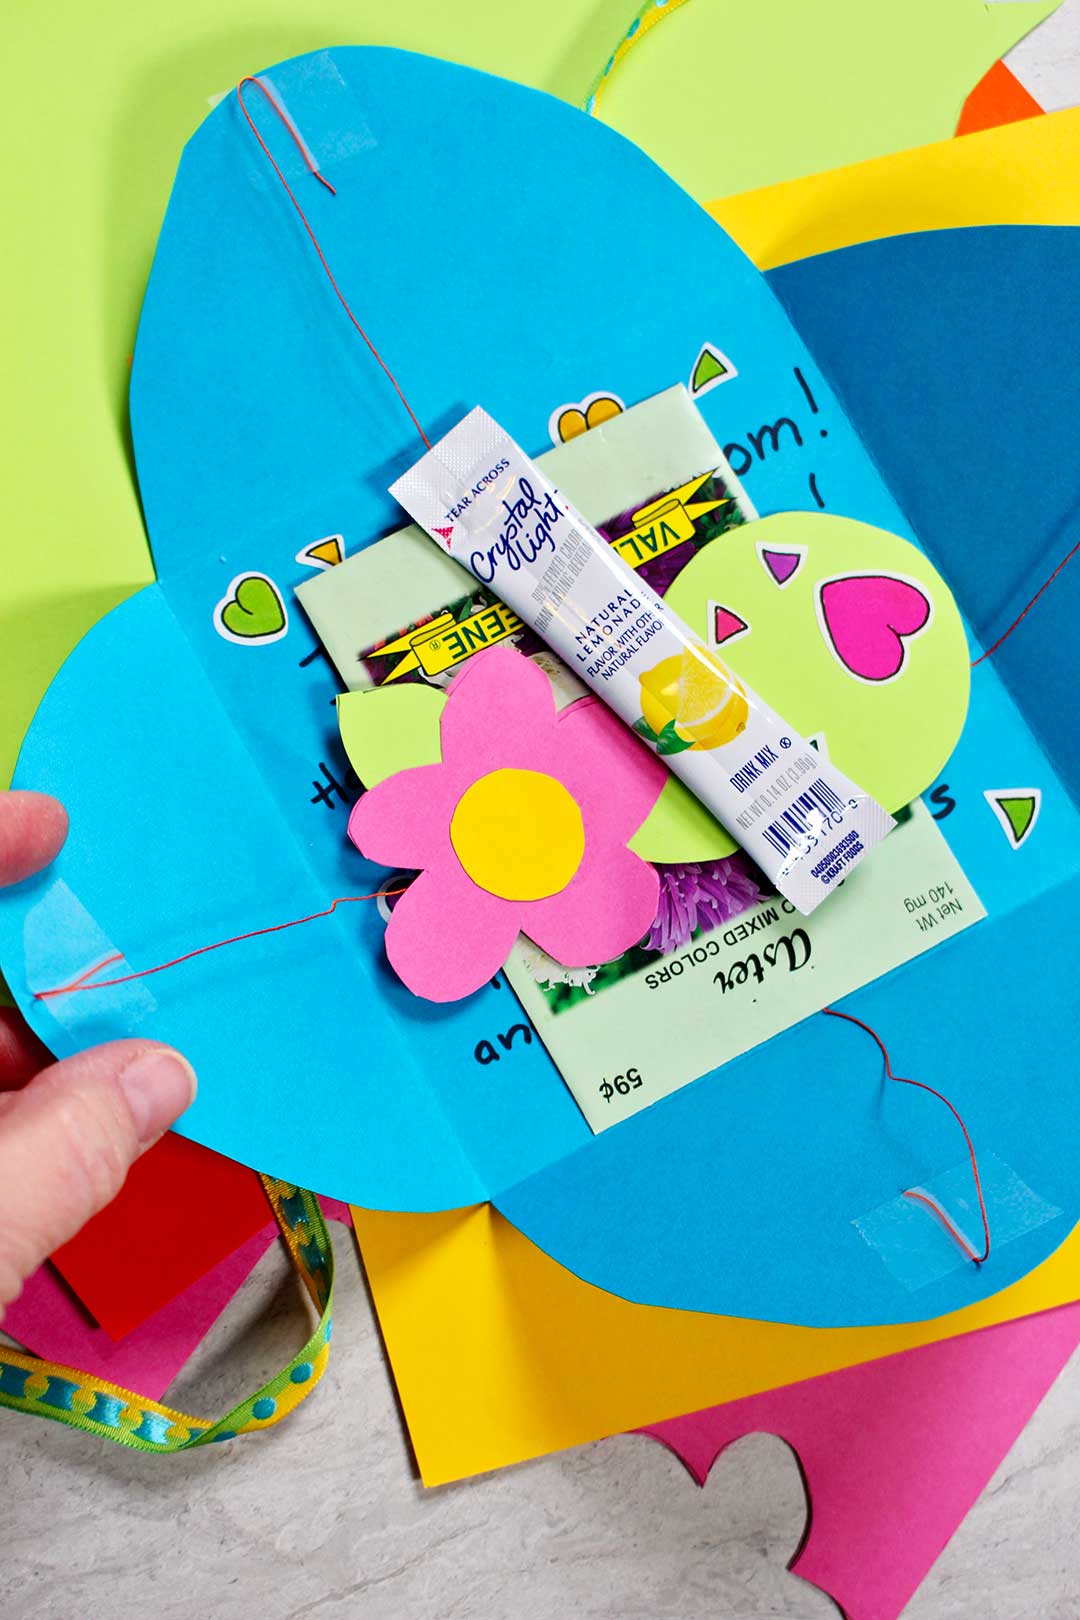 A homemade card with a paper flower, stickers, a drink packet, and seed packet inside.